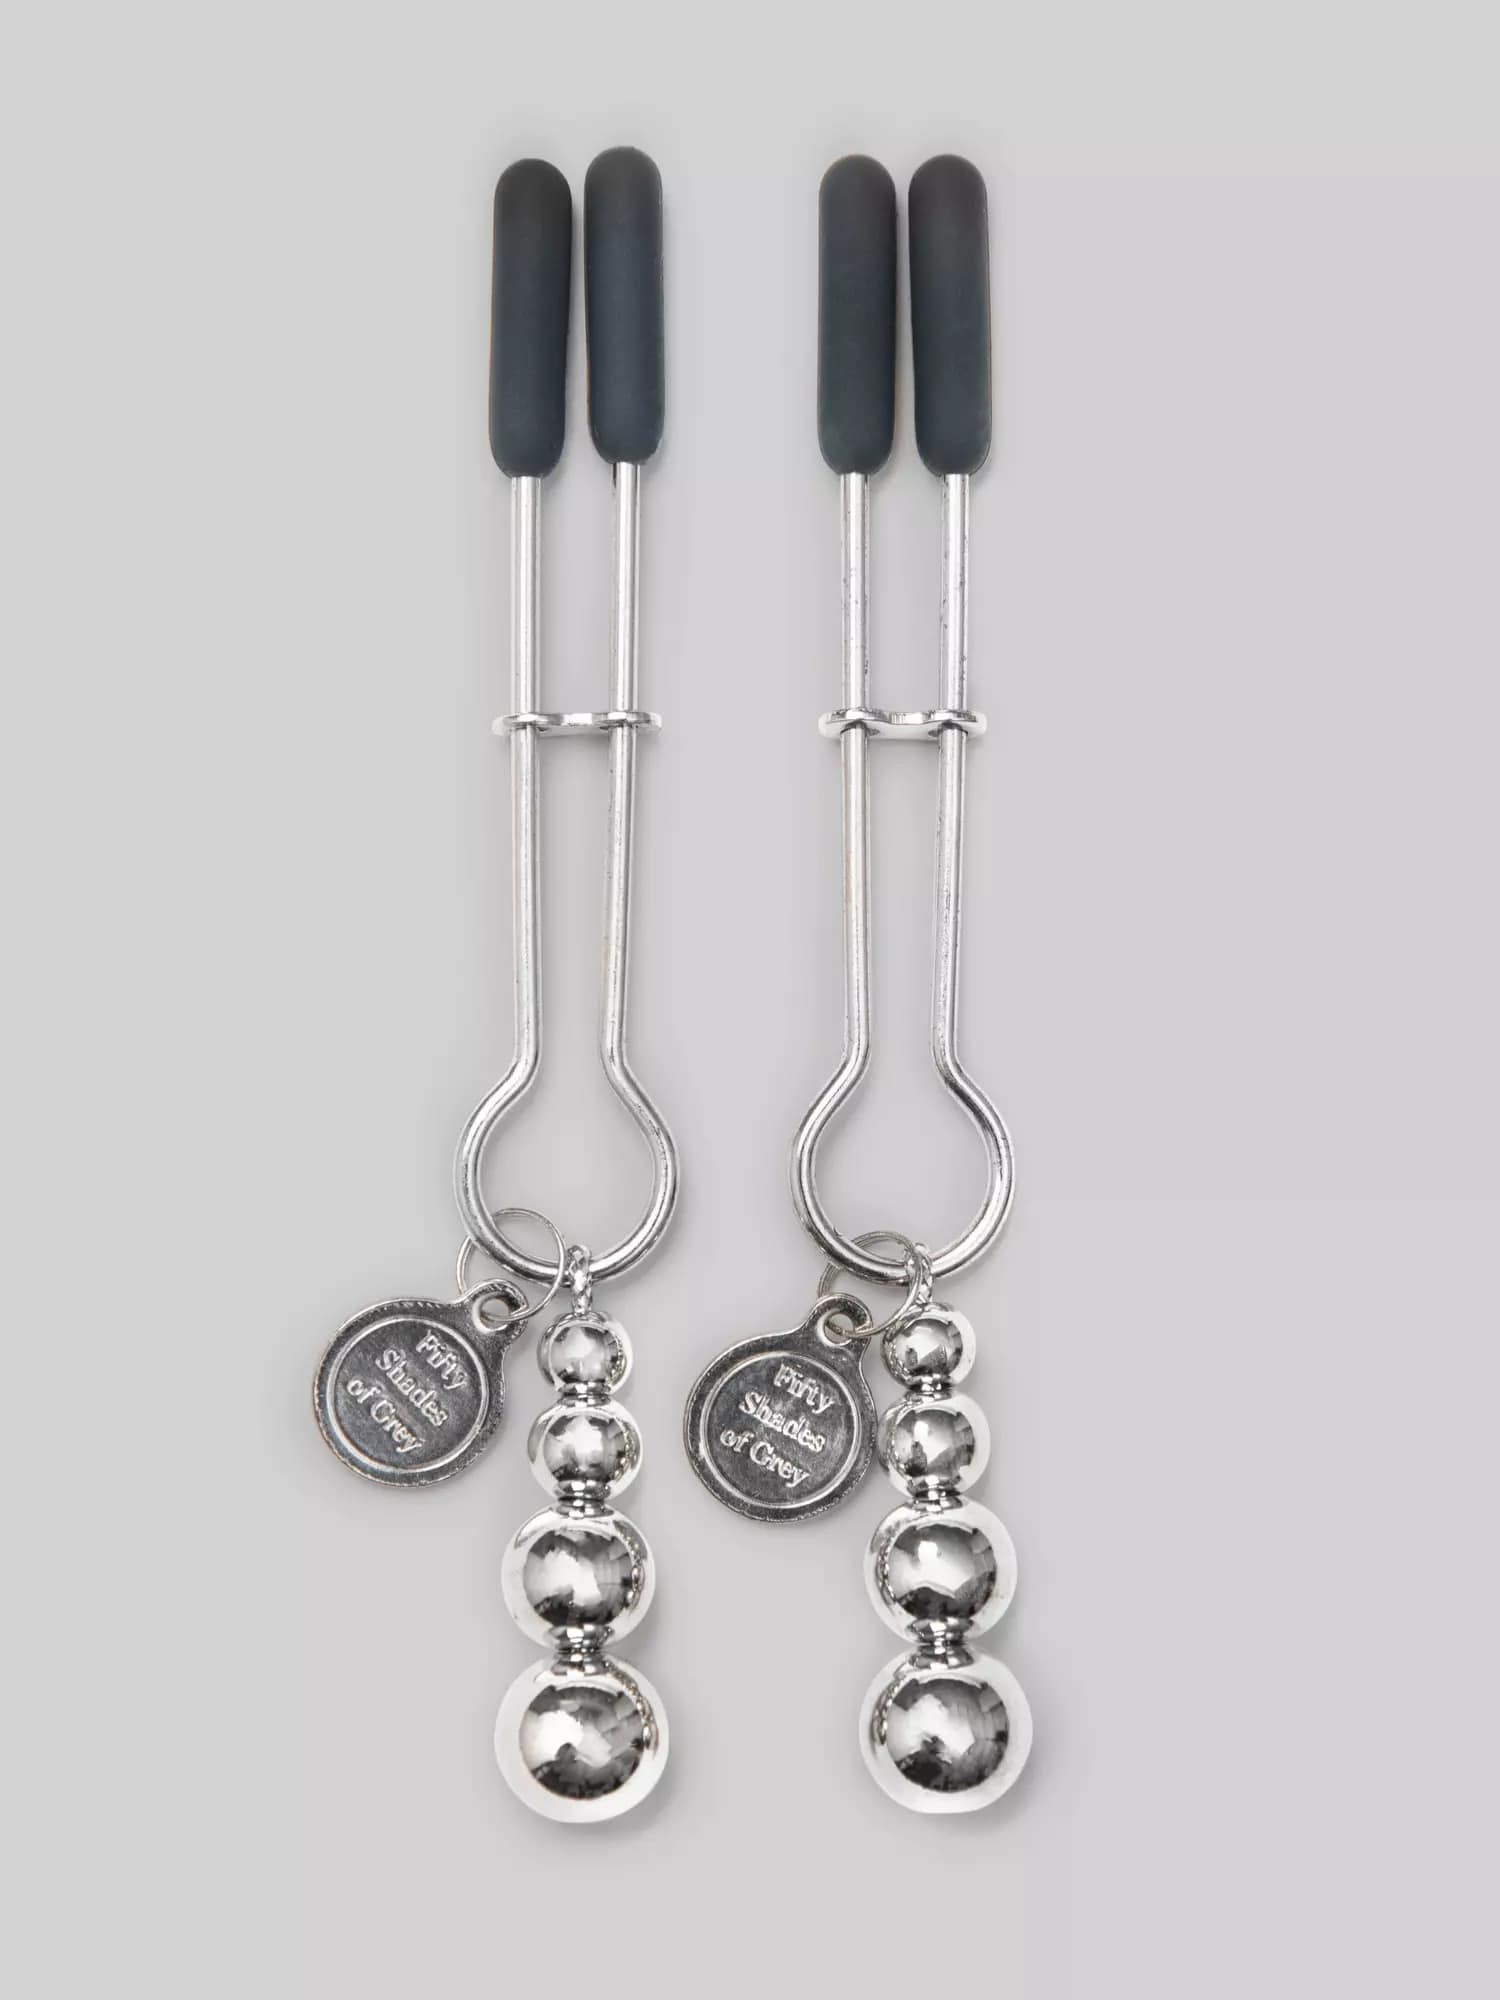 Fifty Shades of Grey The Pinch Adjustable Nipple Clamps. Slide 11